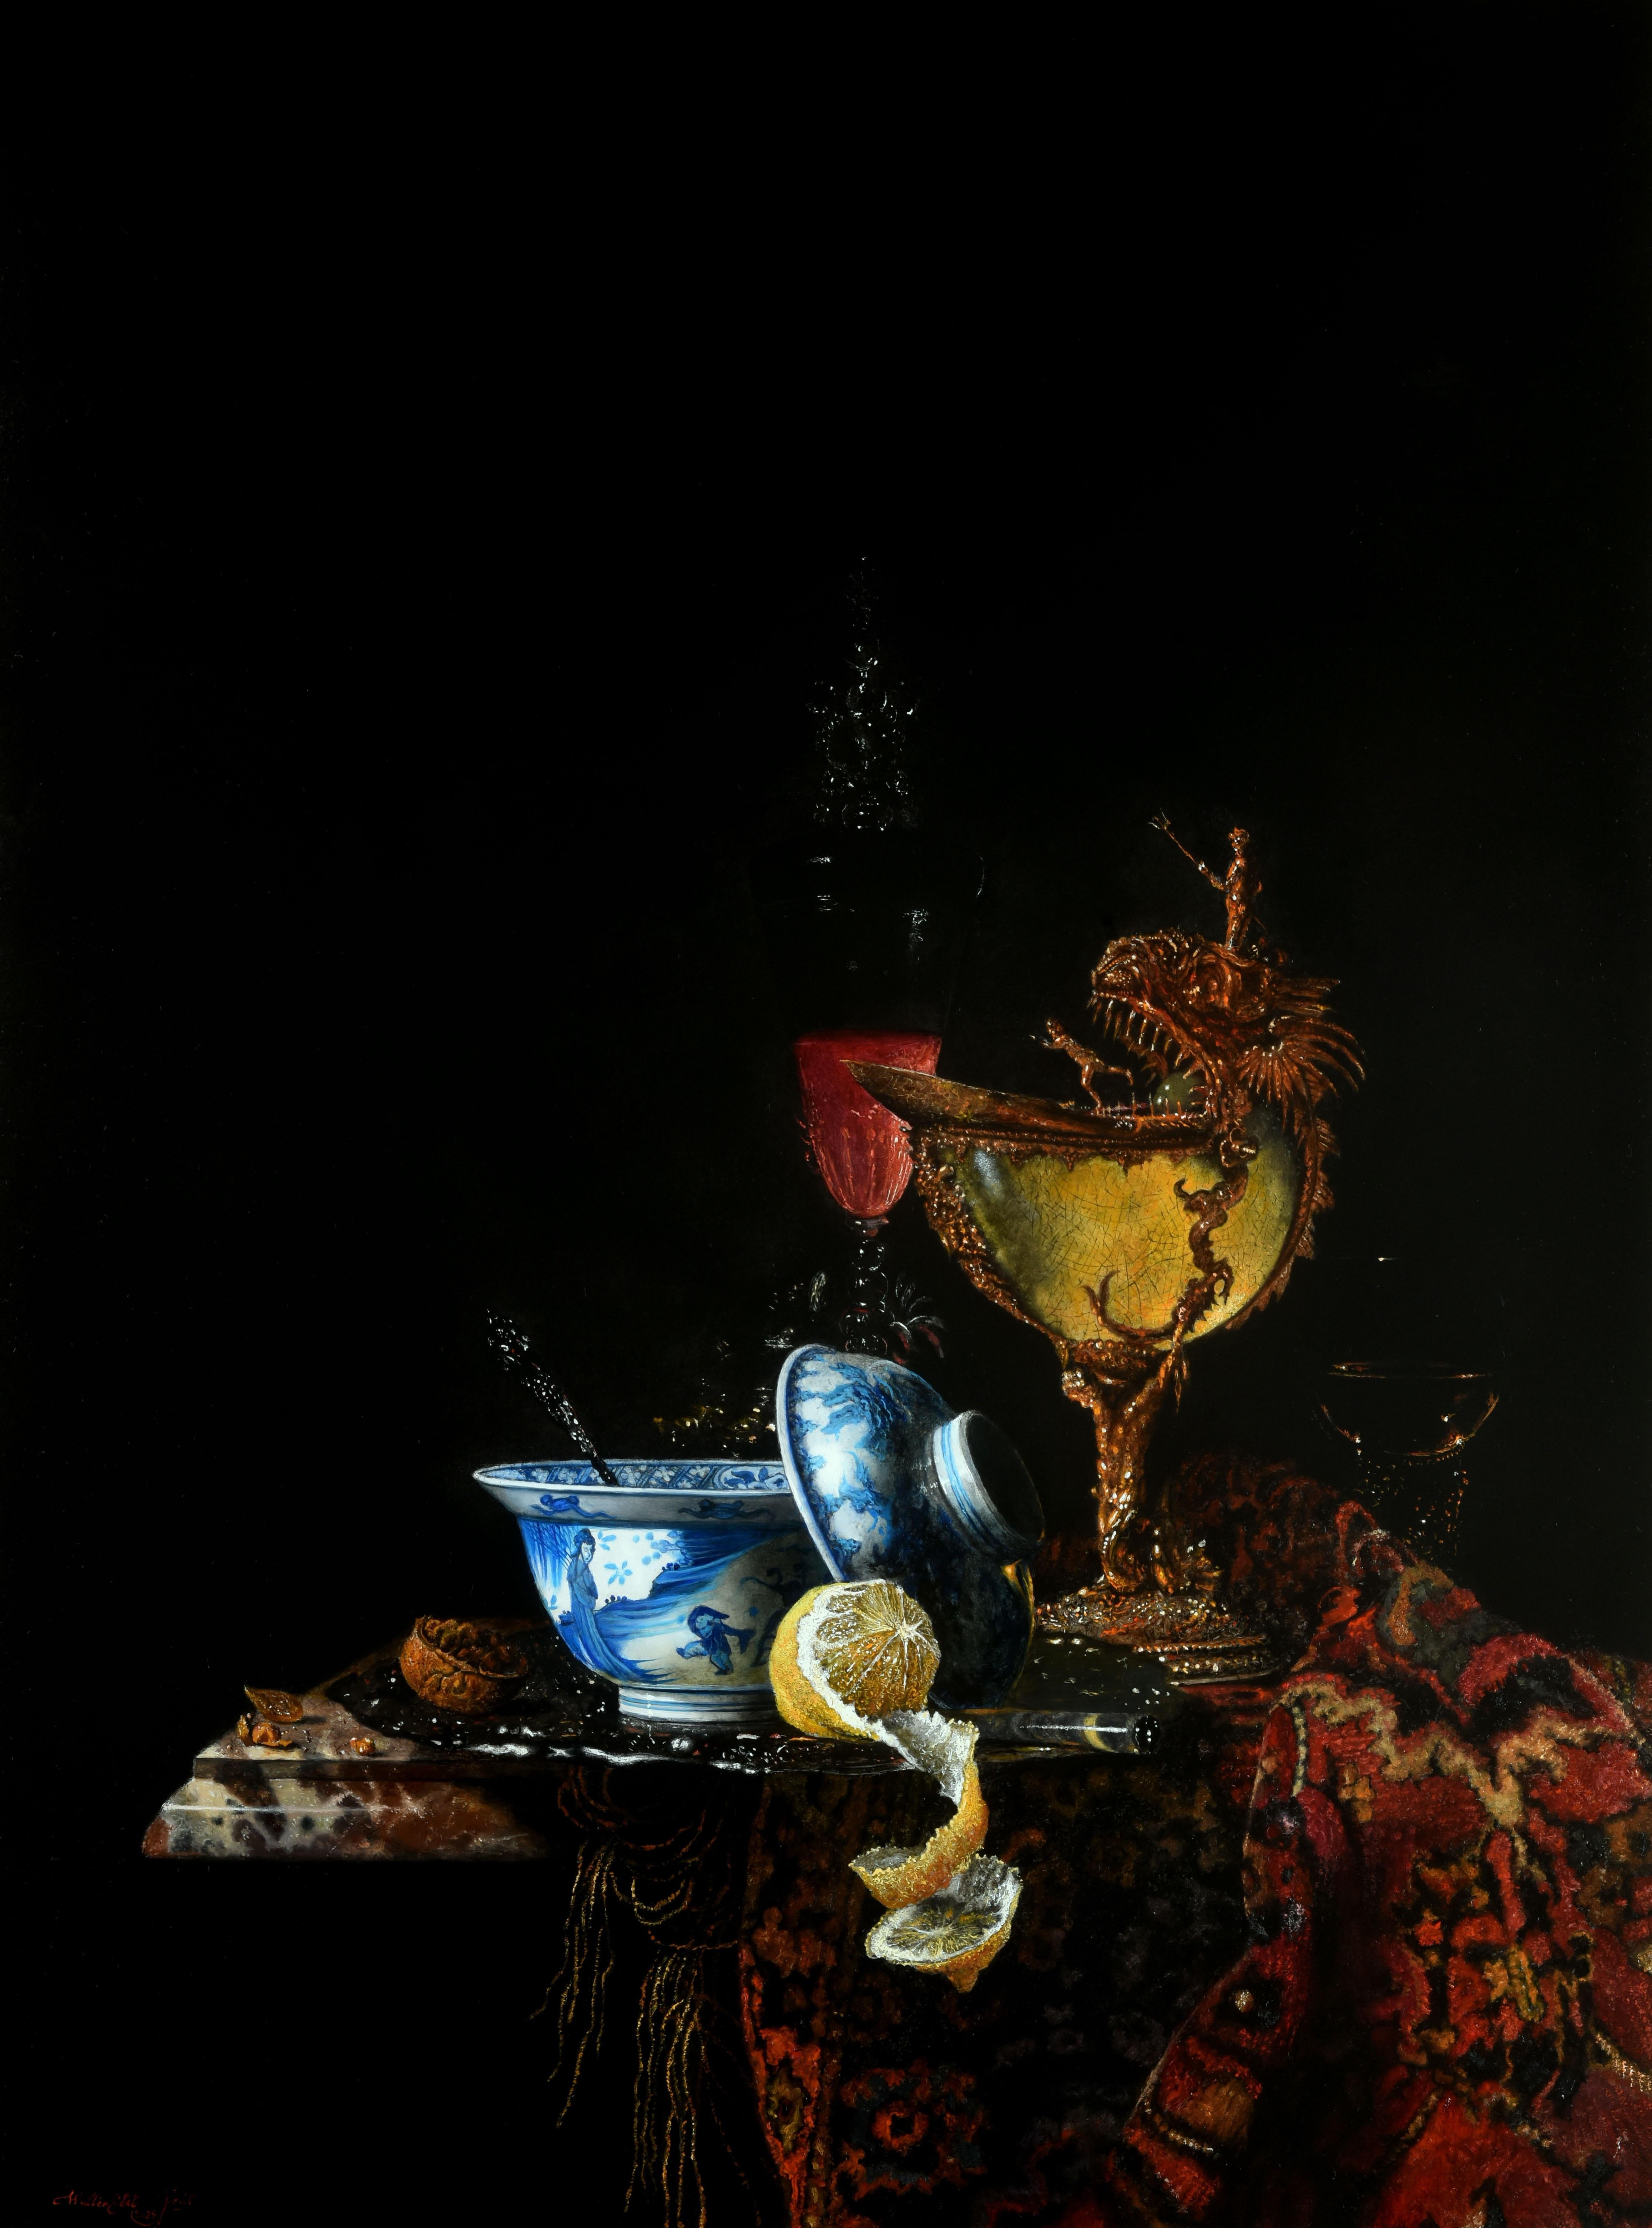 Variatie op Willlem Kalf Variations Oil Painting on Panel Still Life In Stock 
Walter Elst Born in Antwerp, Belgium - 1955  After finishing his study Medicine at the University of Brussels Walter Elst decided to dedicate himself to his calling